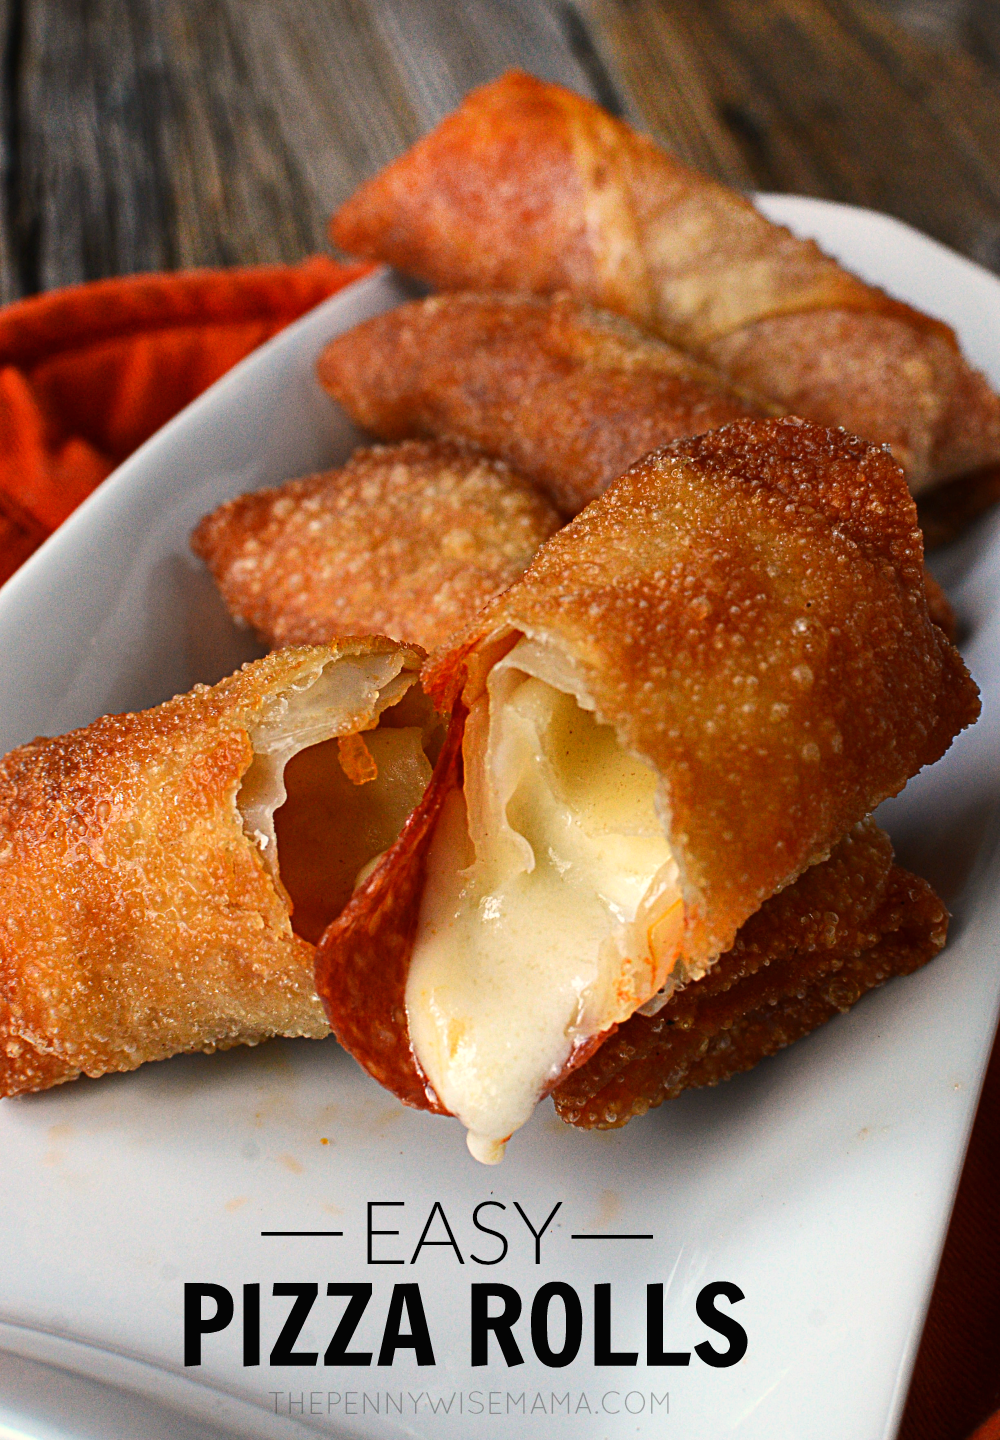 These homemade pizza rolls are delicious and simple to make. Cheesy, with pepperoni in a crispy egg roll wrapper — you can’t go wrong. Perfect for game day, parties, and potlucks, they are sure to be hit among both kids and adults.